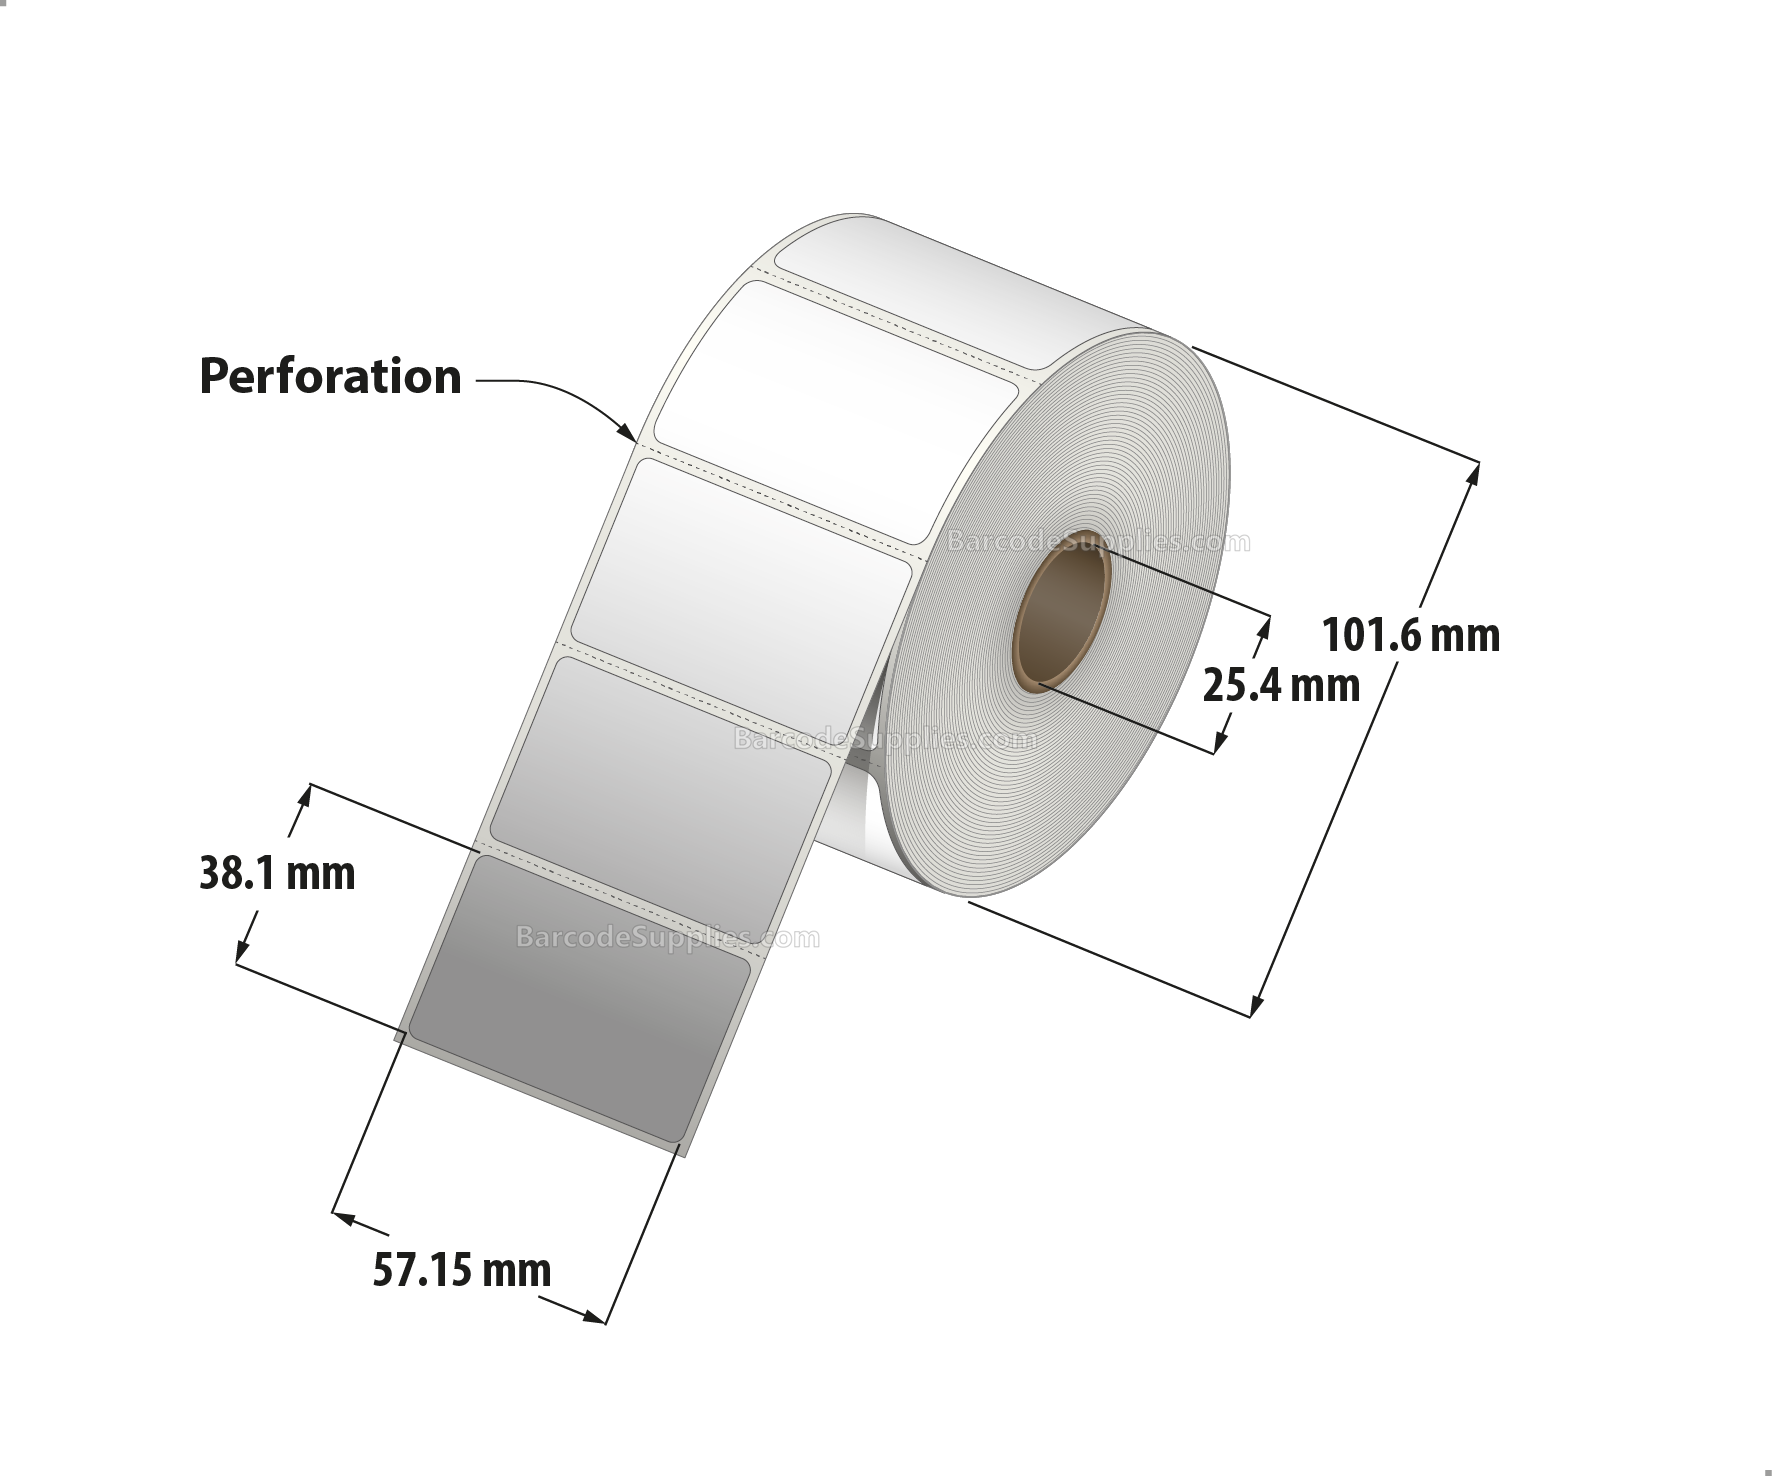 2.25 x 1.5 Direct Thermal White Labels With Rubber Adhesive - Perforated - 960 Labels Per Roll - Carton Of 12 Rolls - 11520 Labels Total - MPN: RDT4-225150-1P